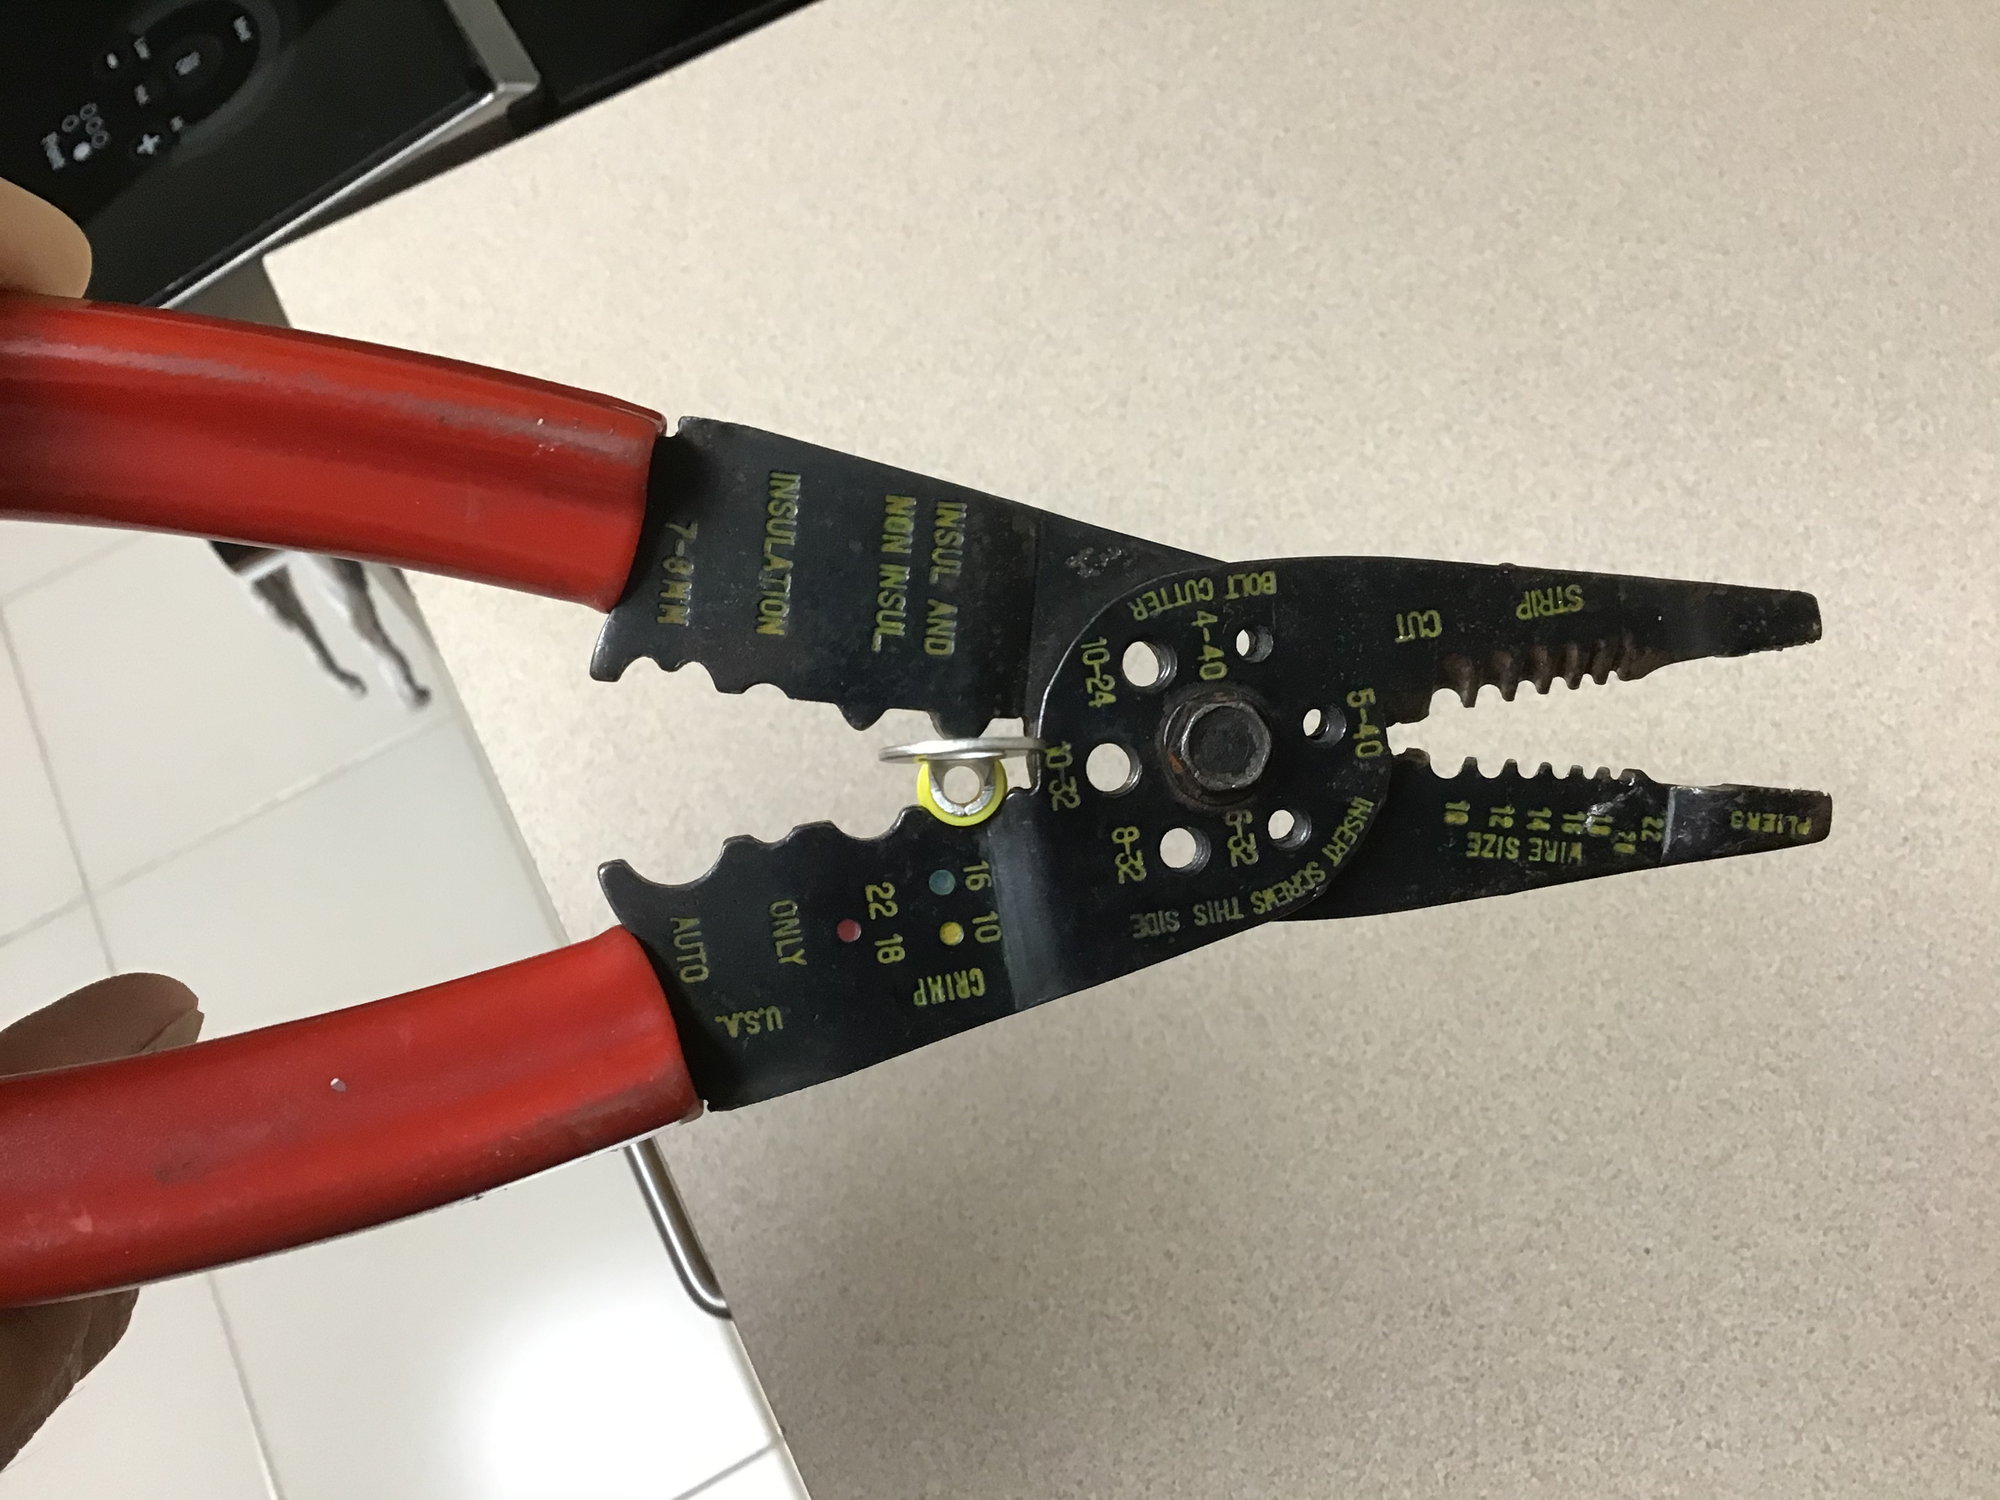 Wiring crimping tool - which one? - The Hull Truth - Boating and Fishing  Forum